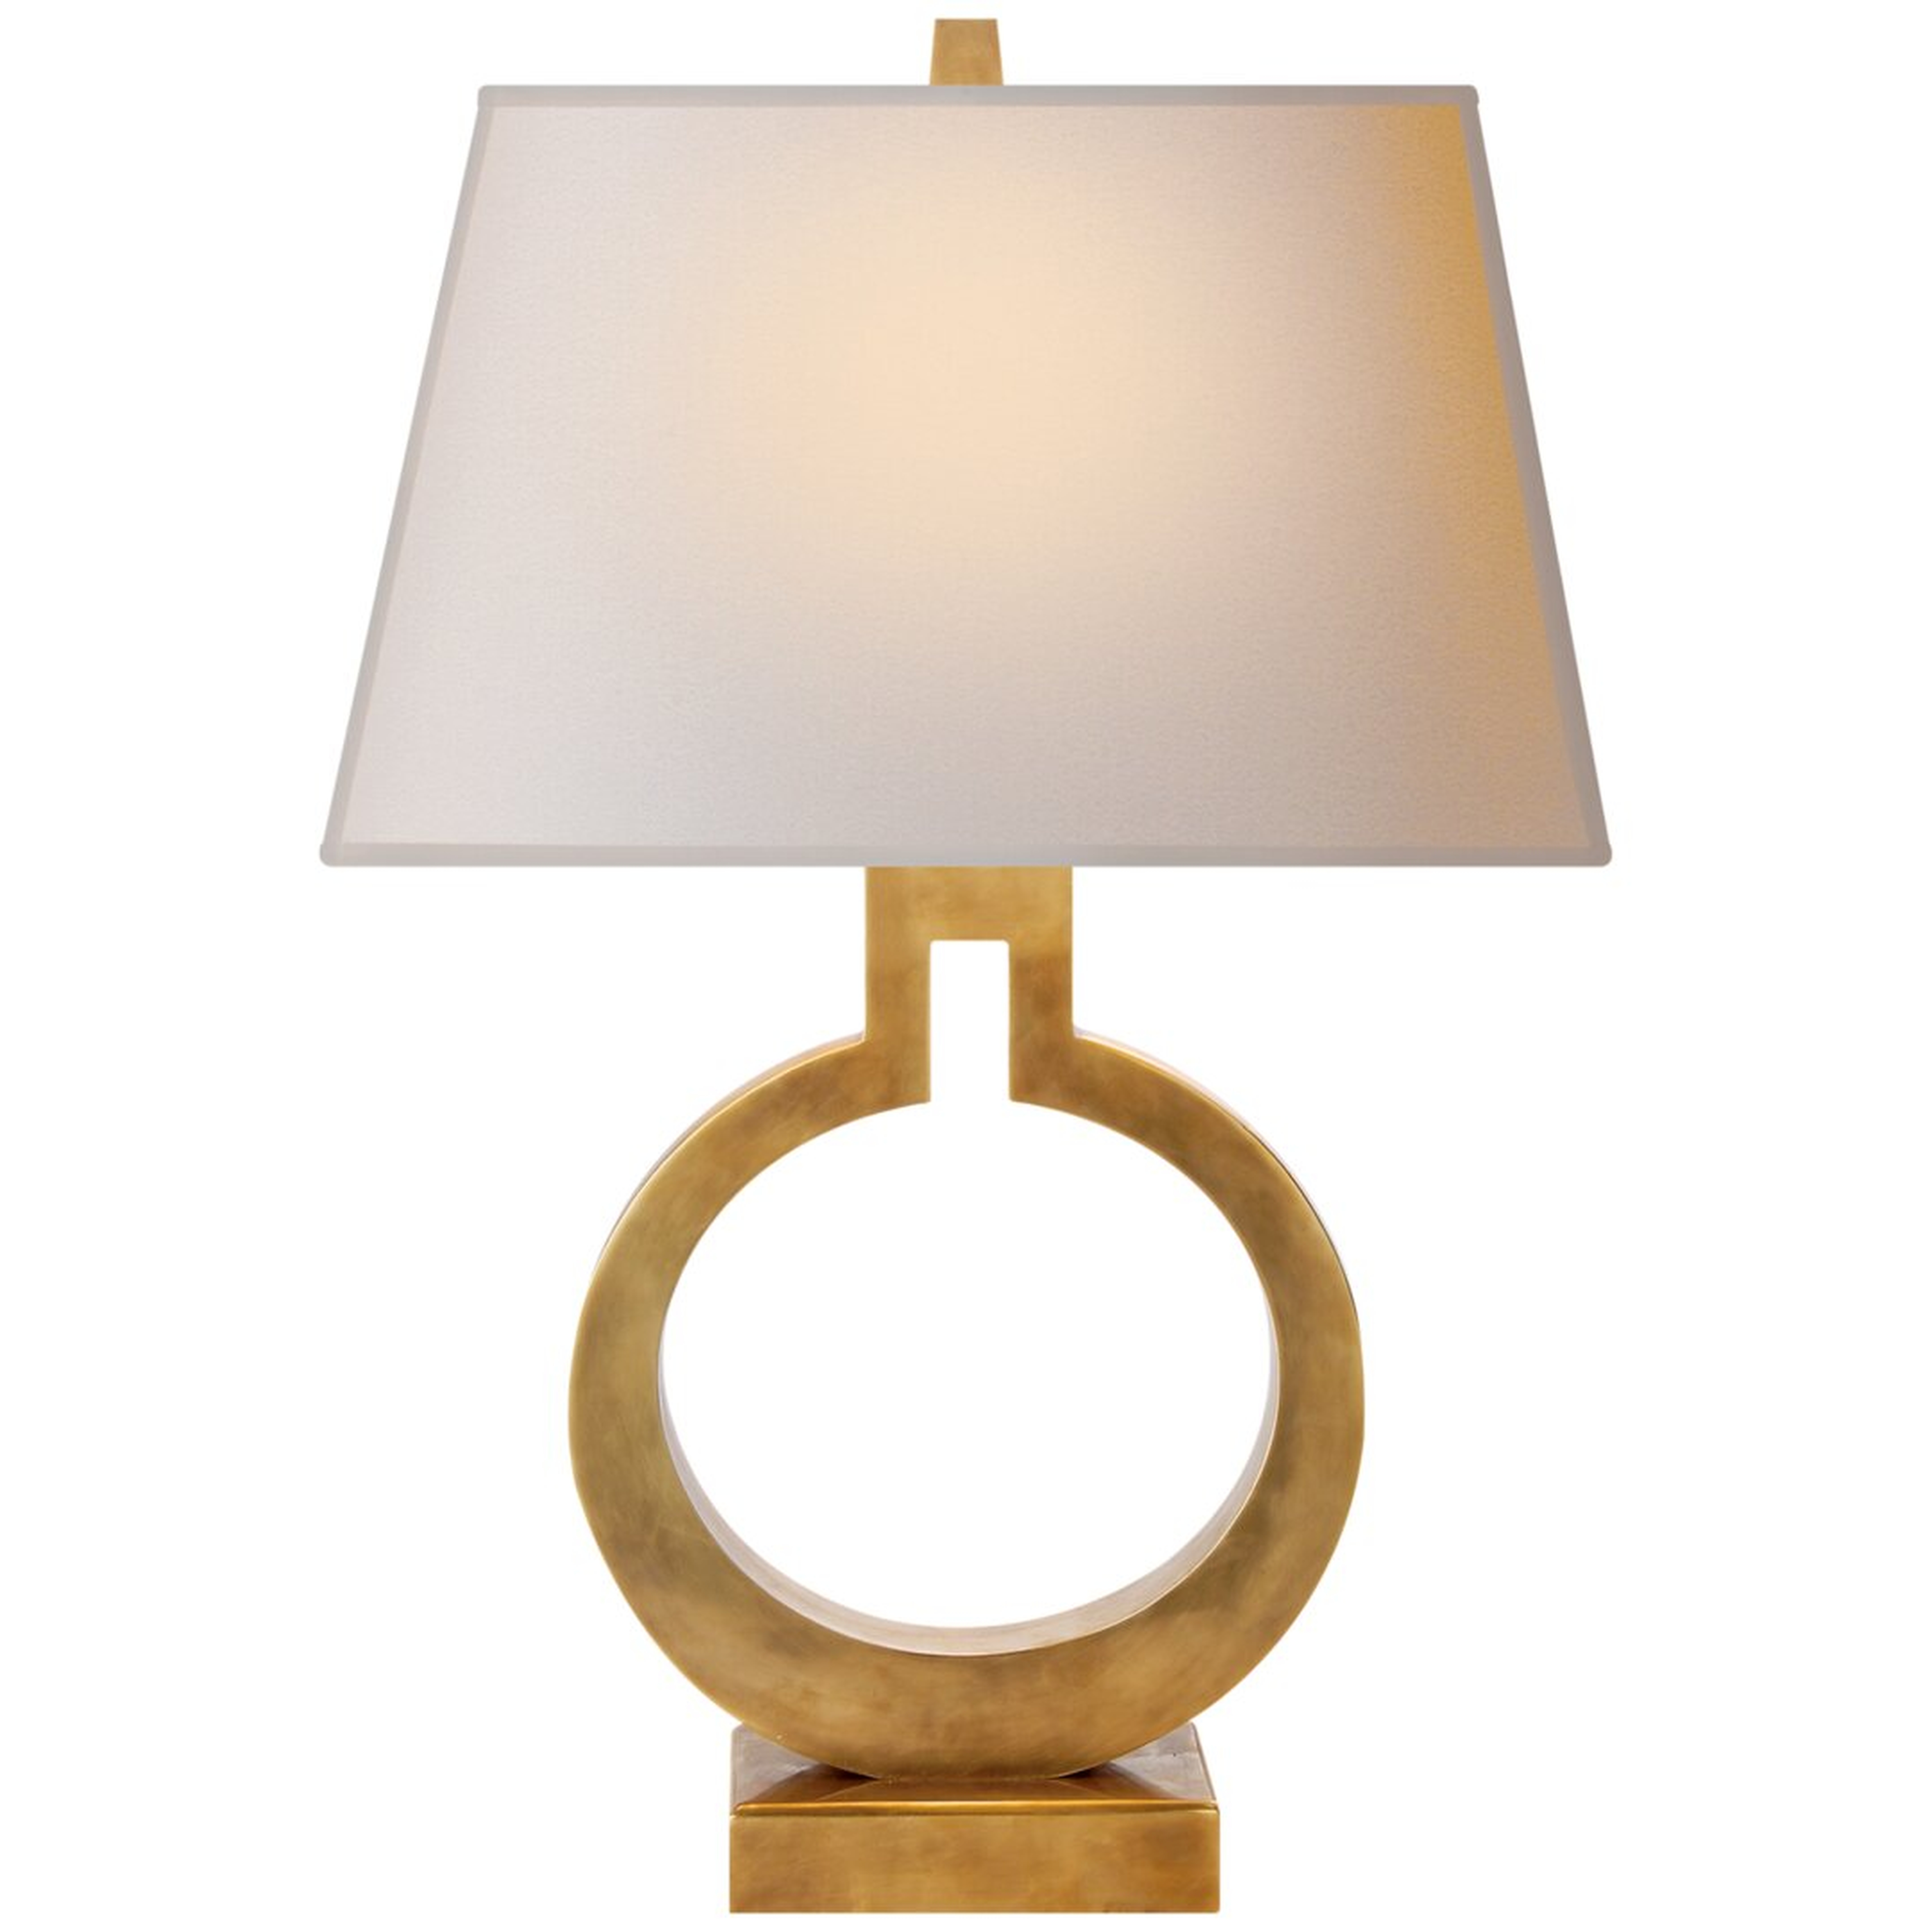 "Visual Comfort Ring Form Table Lamp by E. F. Chapman" - Perigold